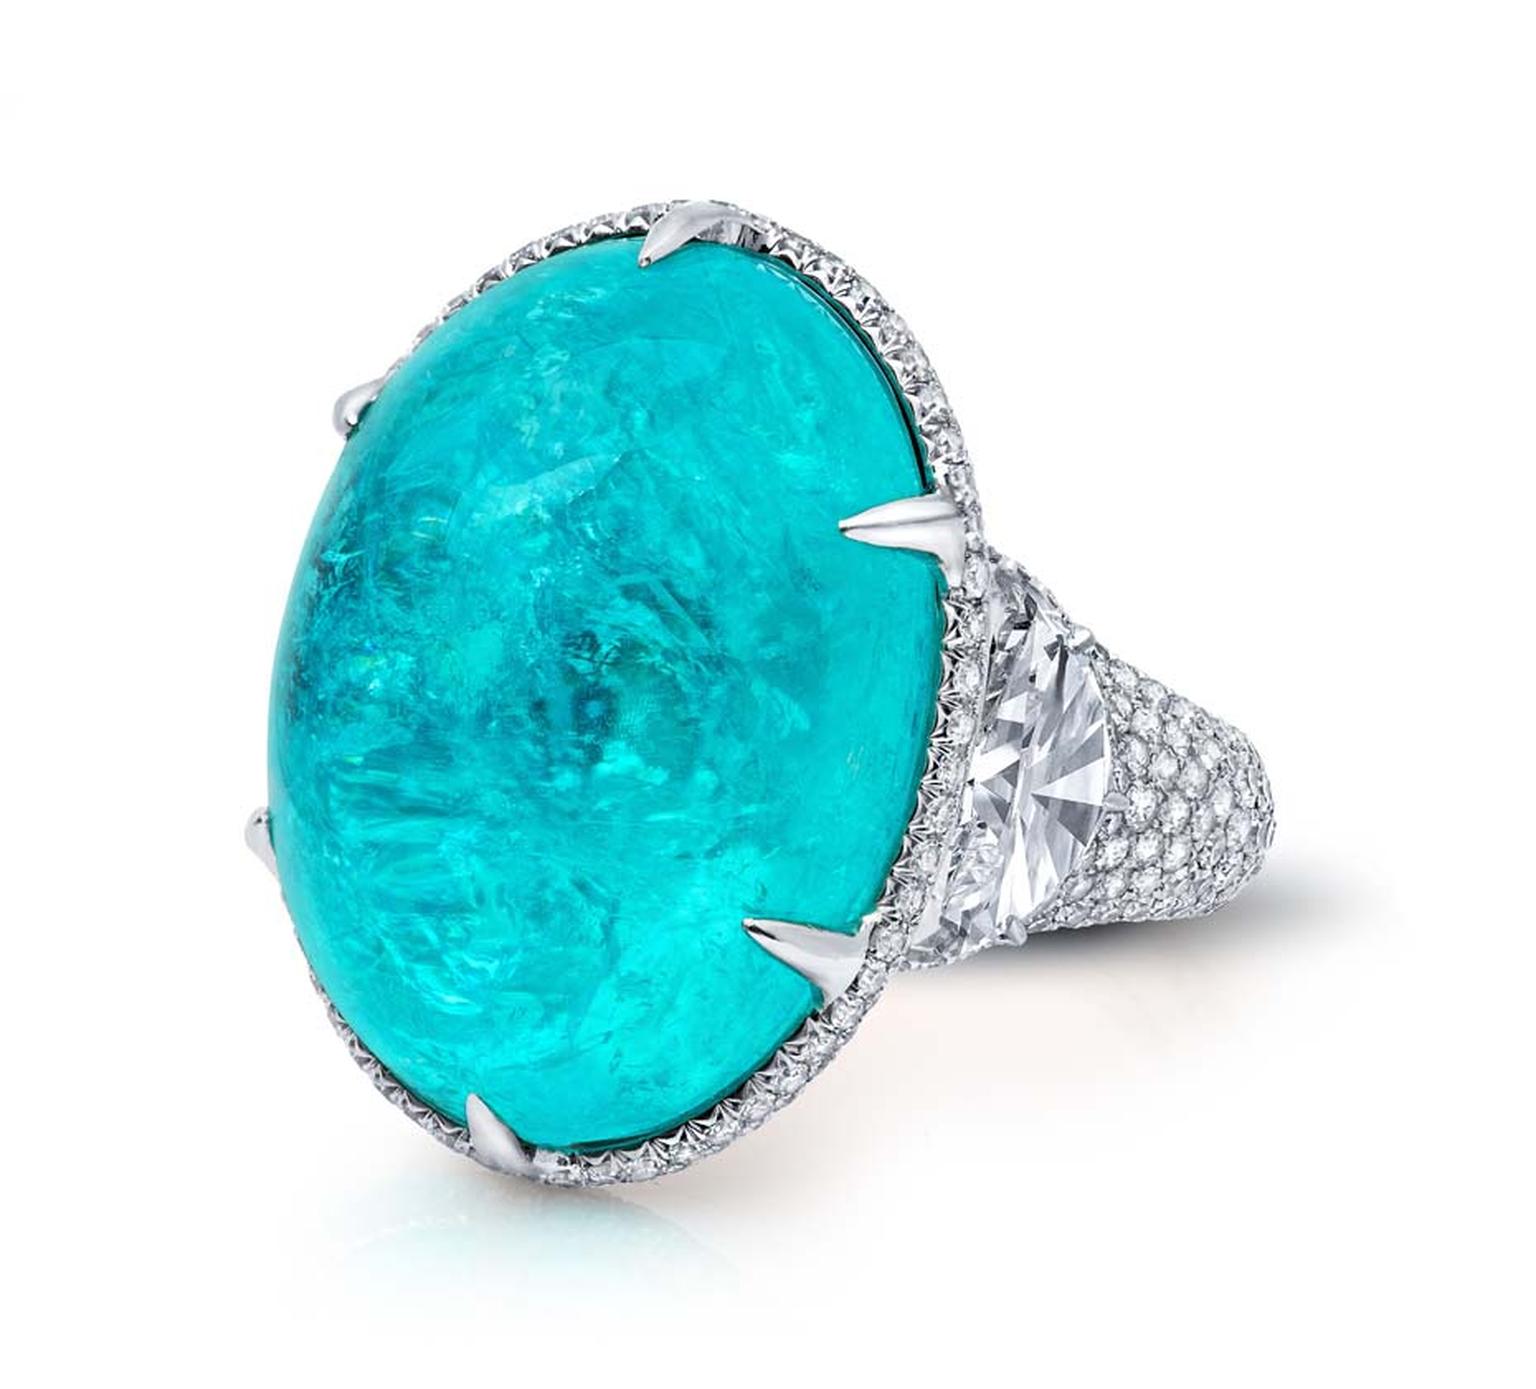 Beverly Hills-based Martin Katz shows off his uncompromising craftsmanship in the new Paraiba collection, which showcases vivid turquoise Paraiba tourmalines of perfect clarity that have been collected by Katz over the years.